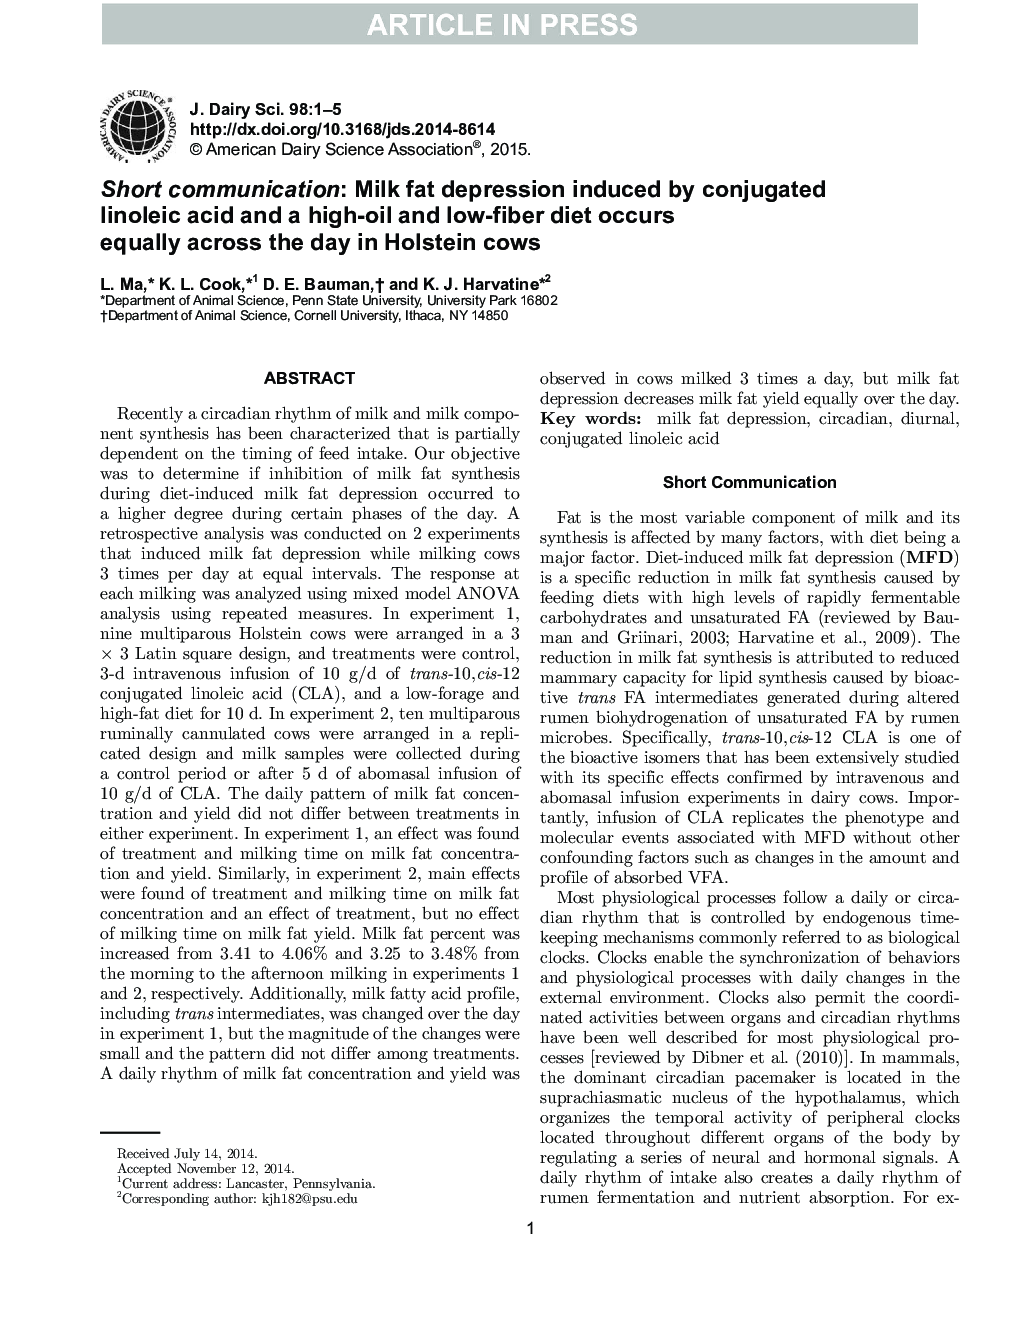 Short communication: Milk fat depression induced by conjugated linoleic acid and a high-oil and low-fiber diet occurs equally across the day in Holstein cows